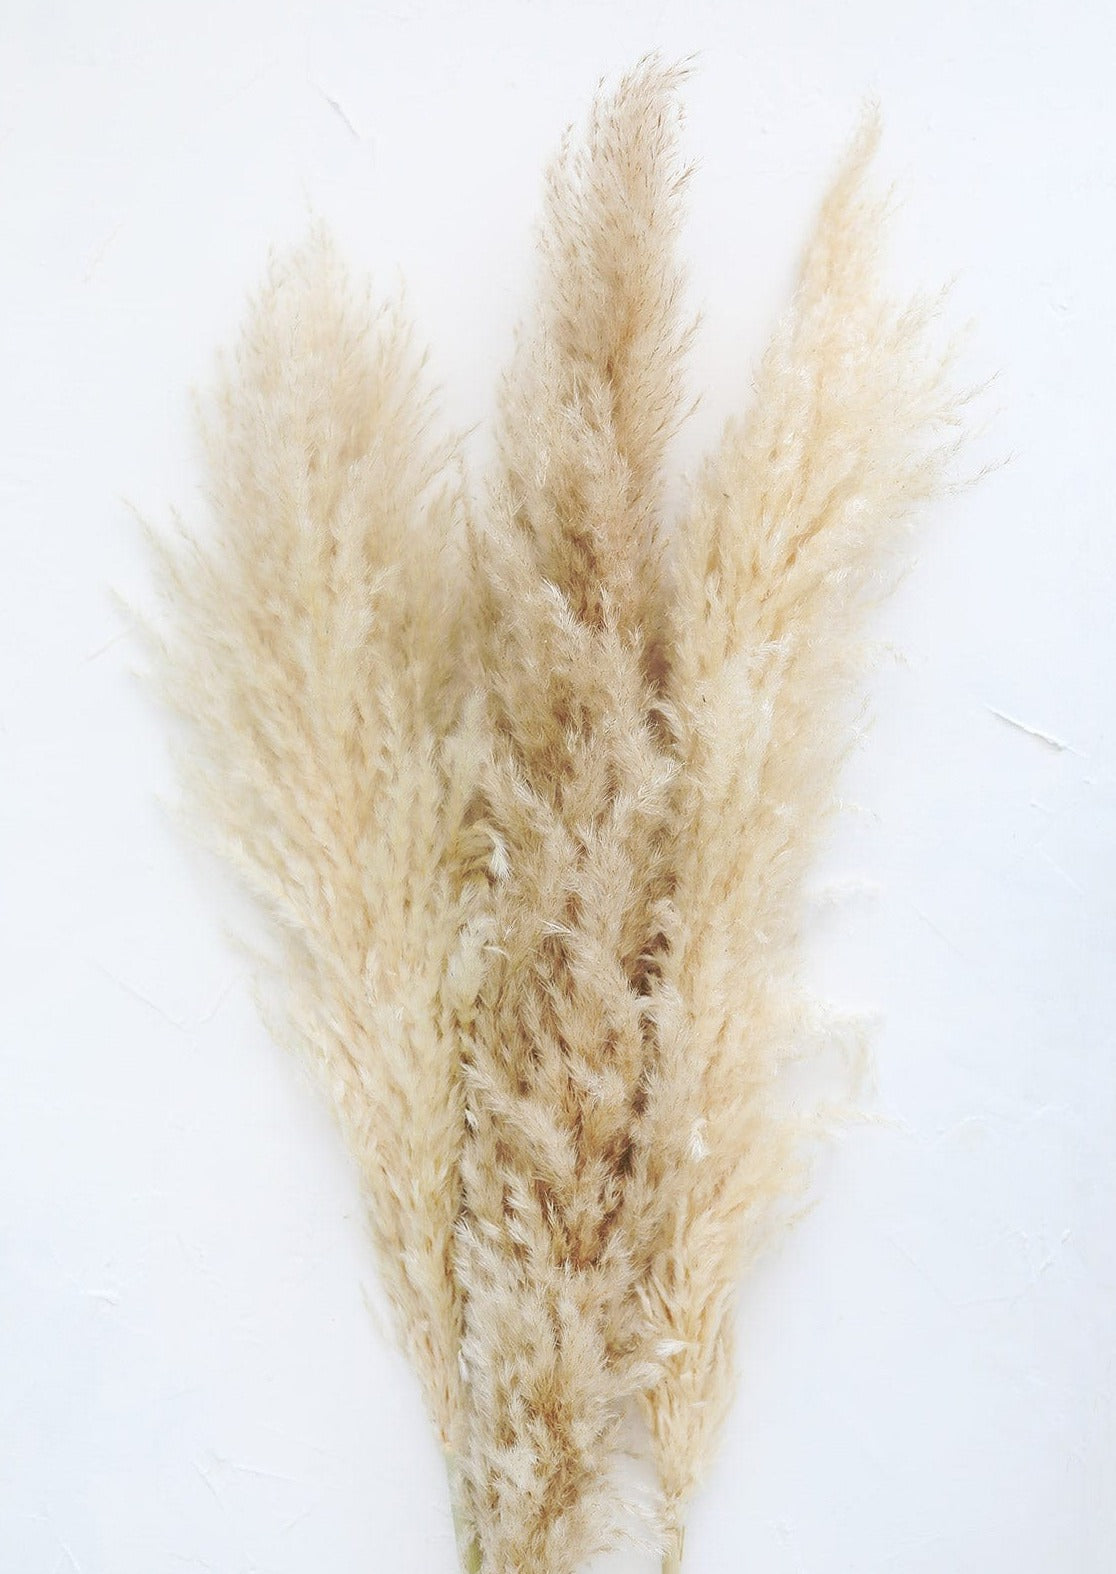 Dried Pampas Grasses in Tan